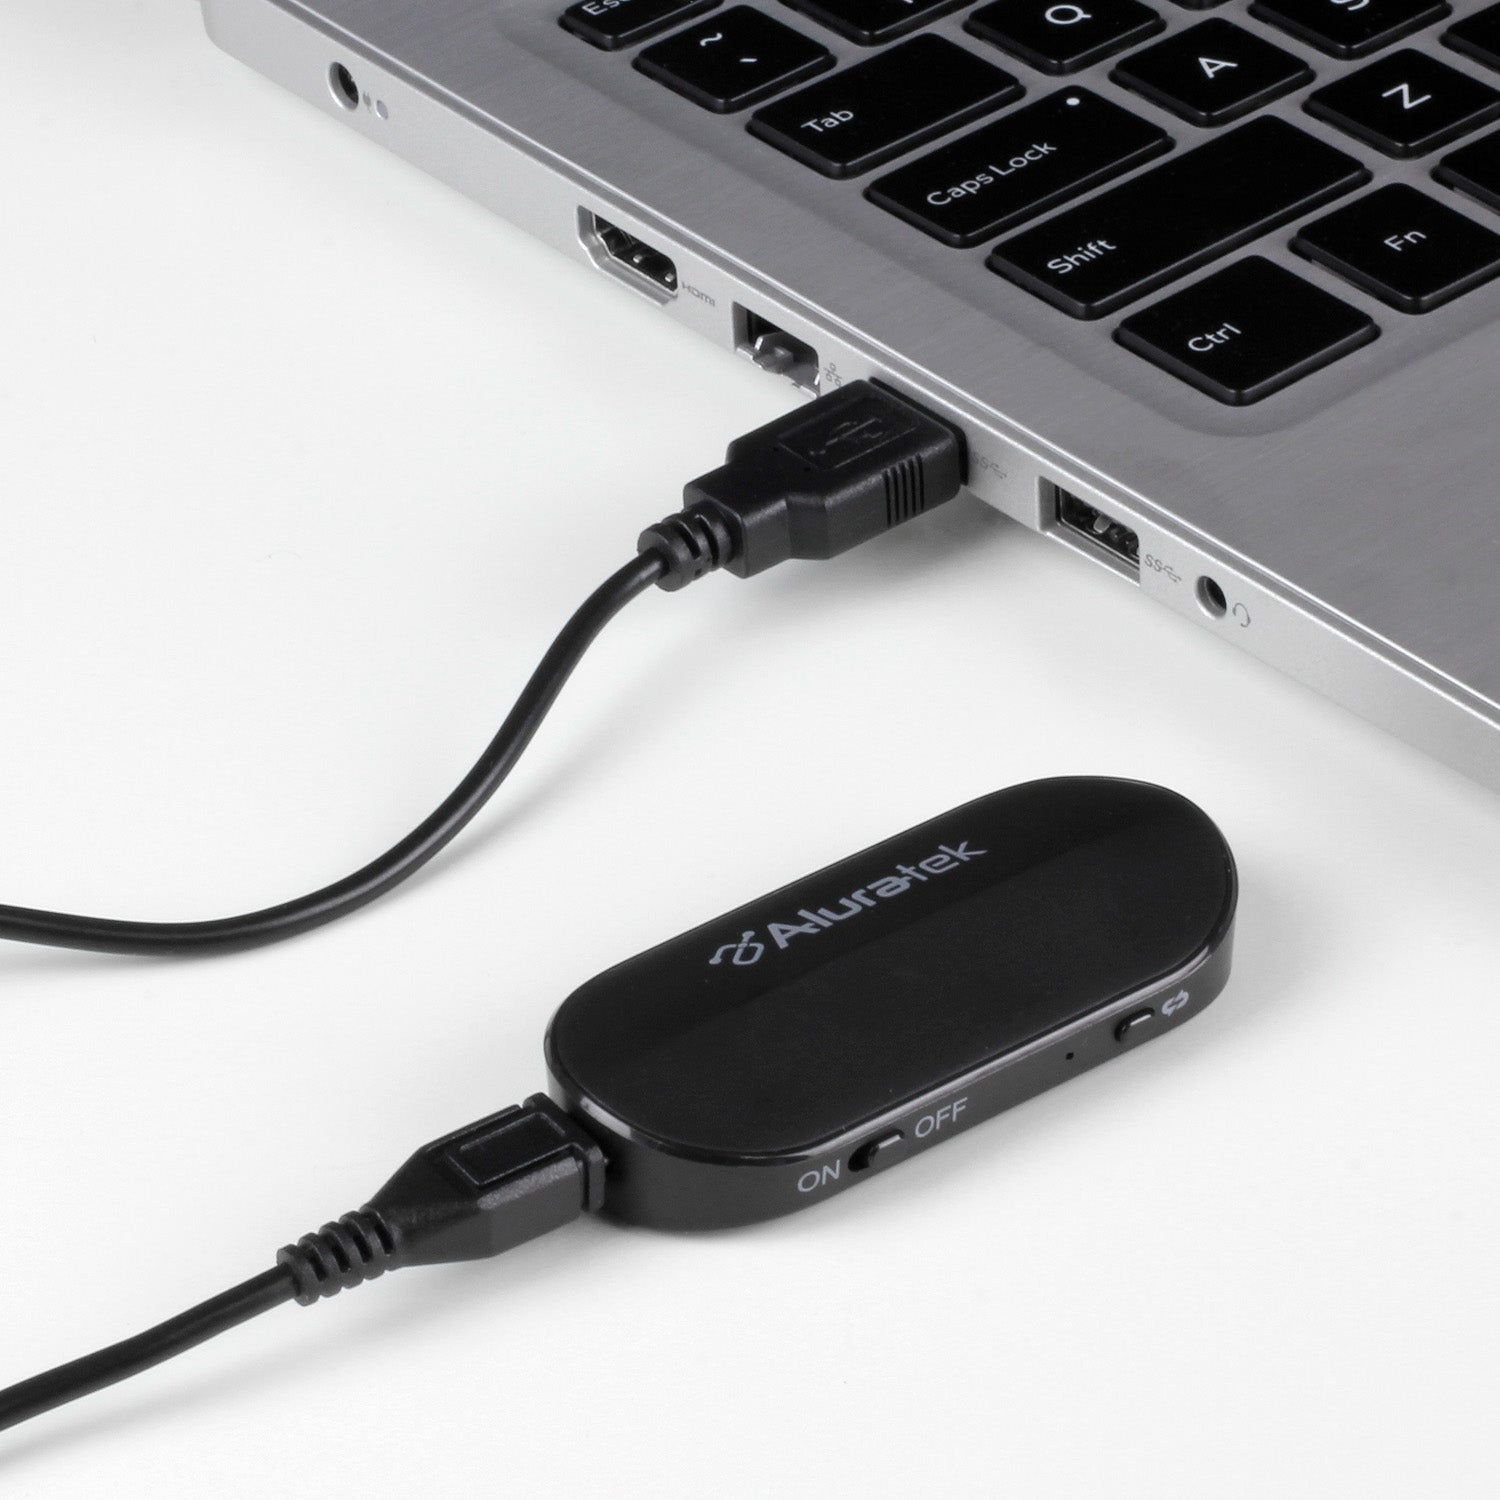 Insignia™ Bluetooth 5.0 USB Adapter for Laptops and Desktops